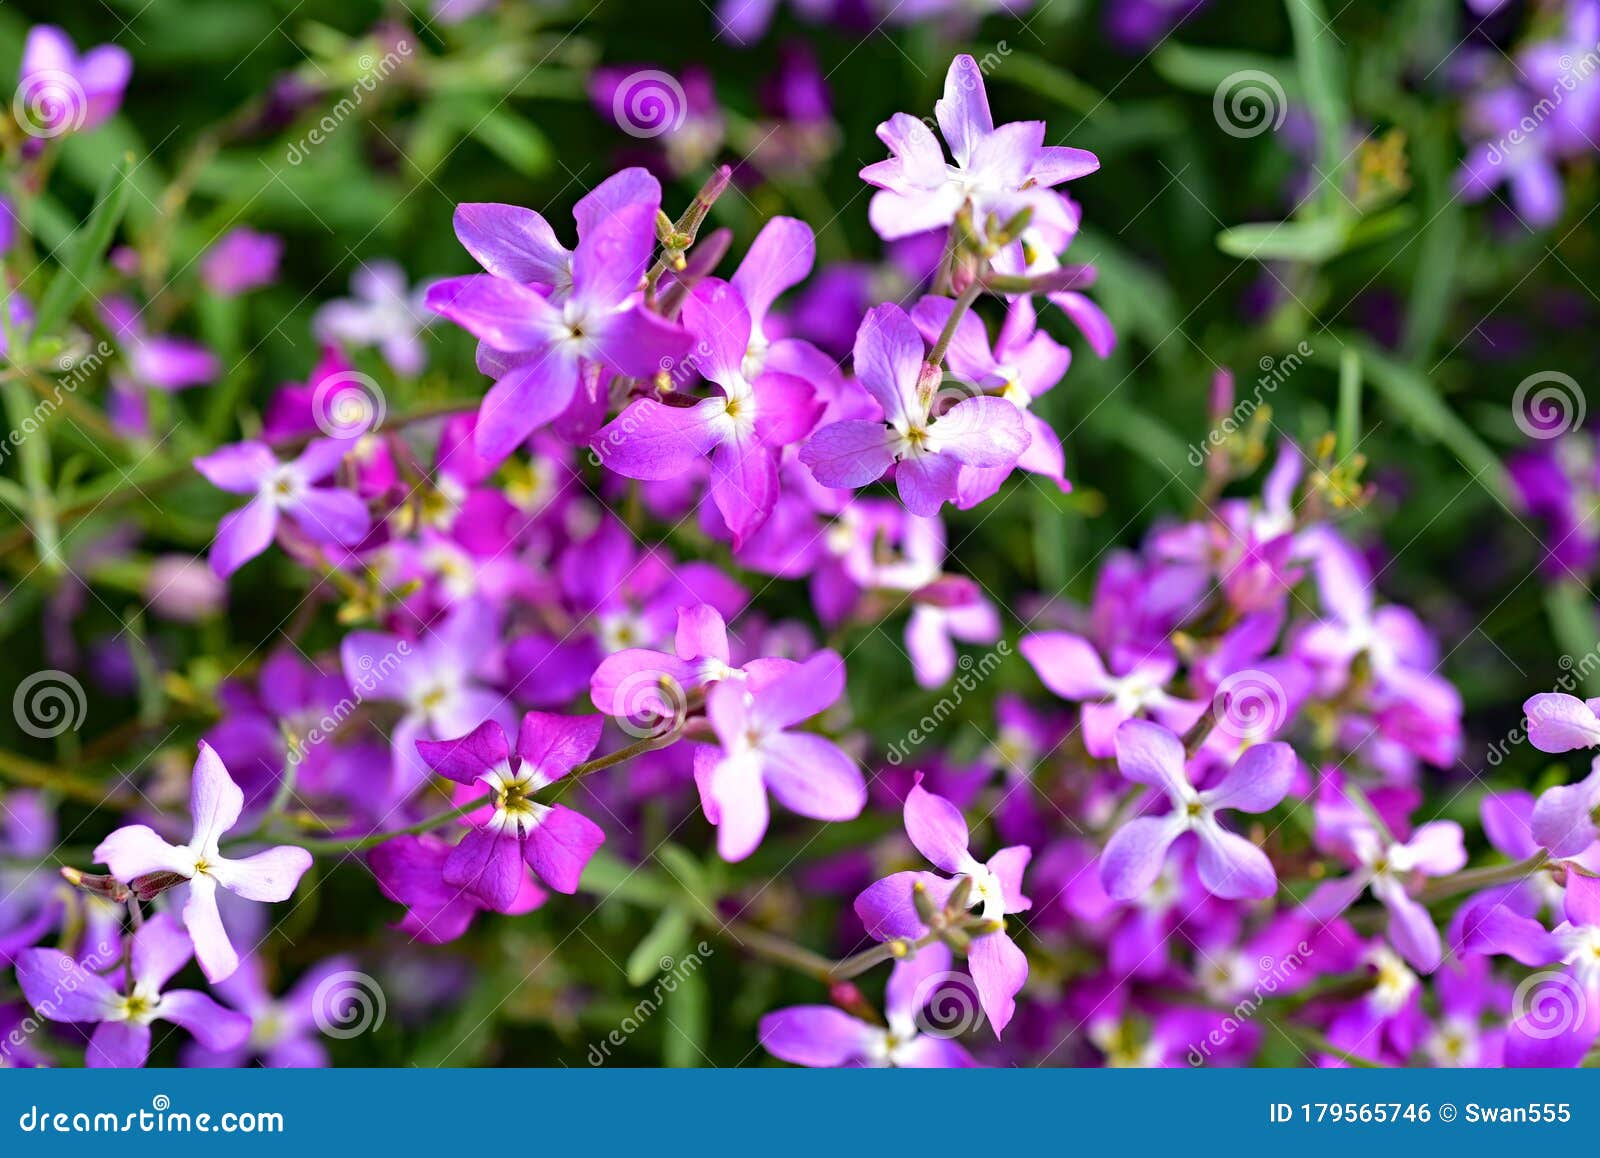 Matthiola Longipetala, Known As Night-scented Stock Or Evening Stock ...